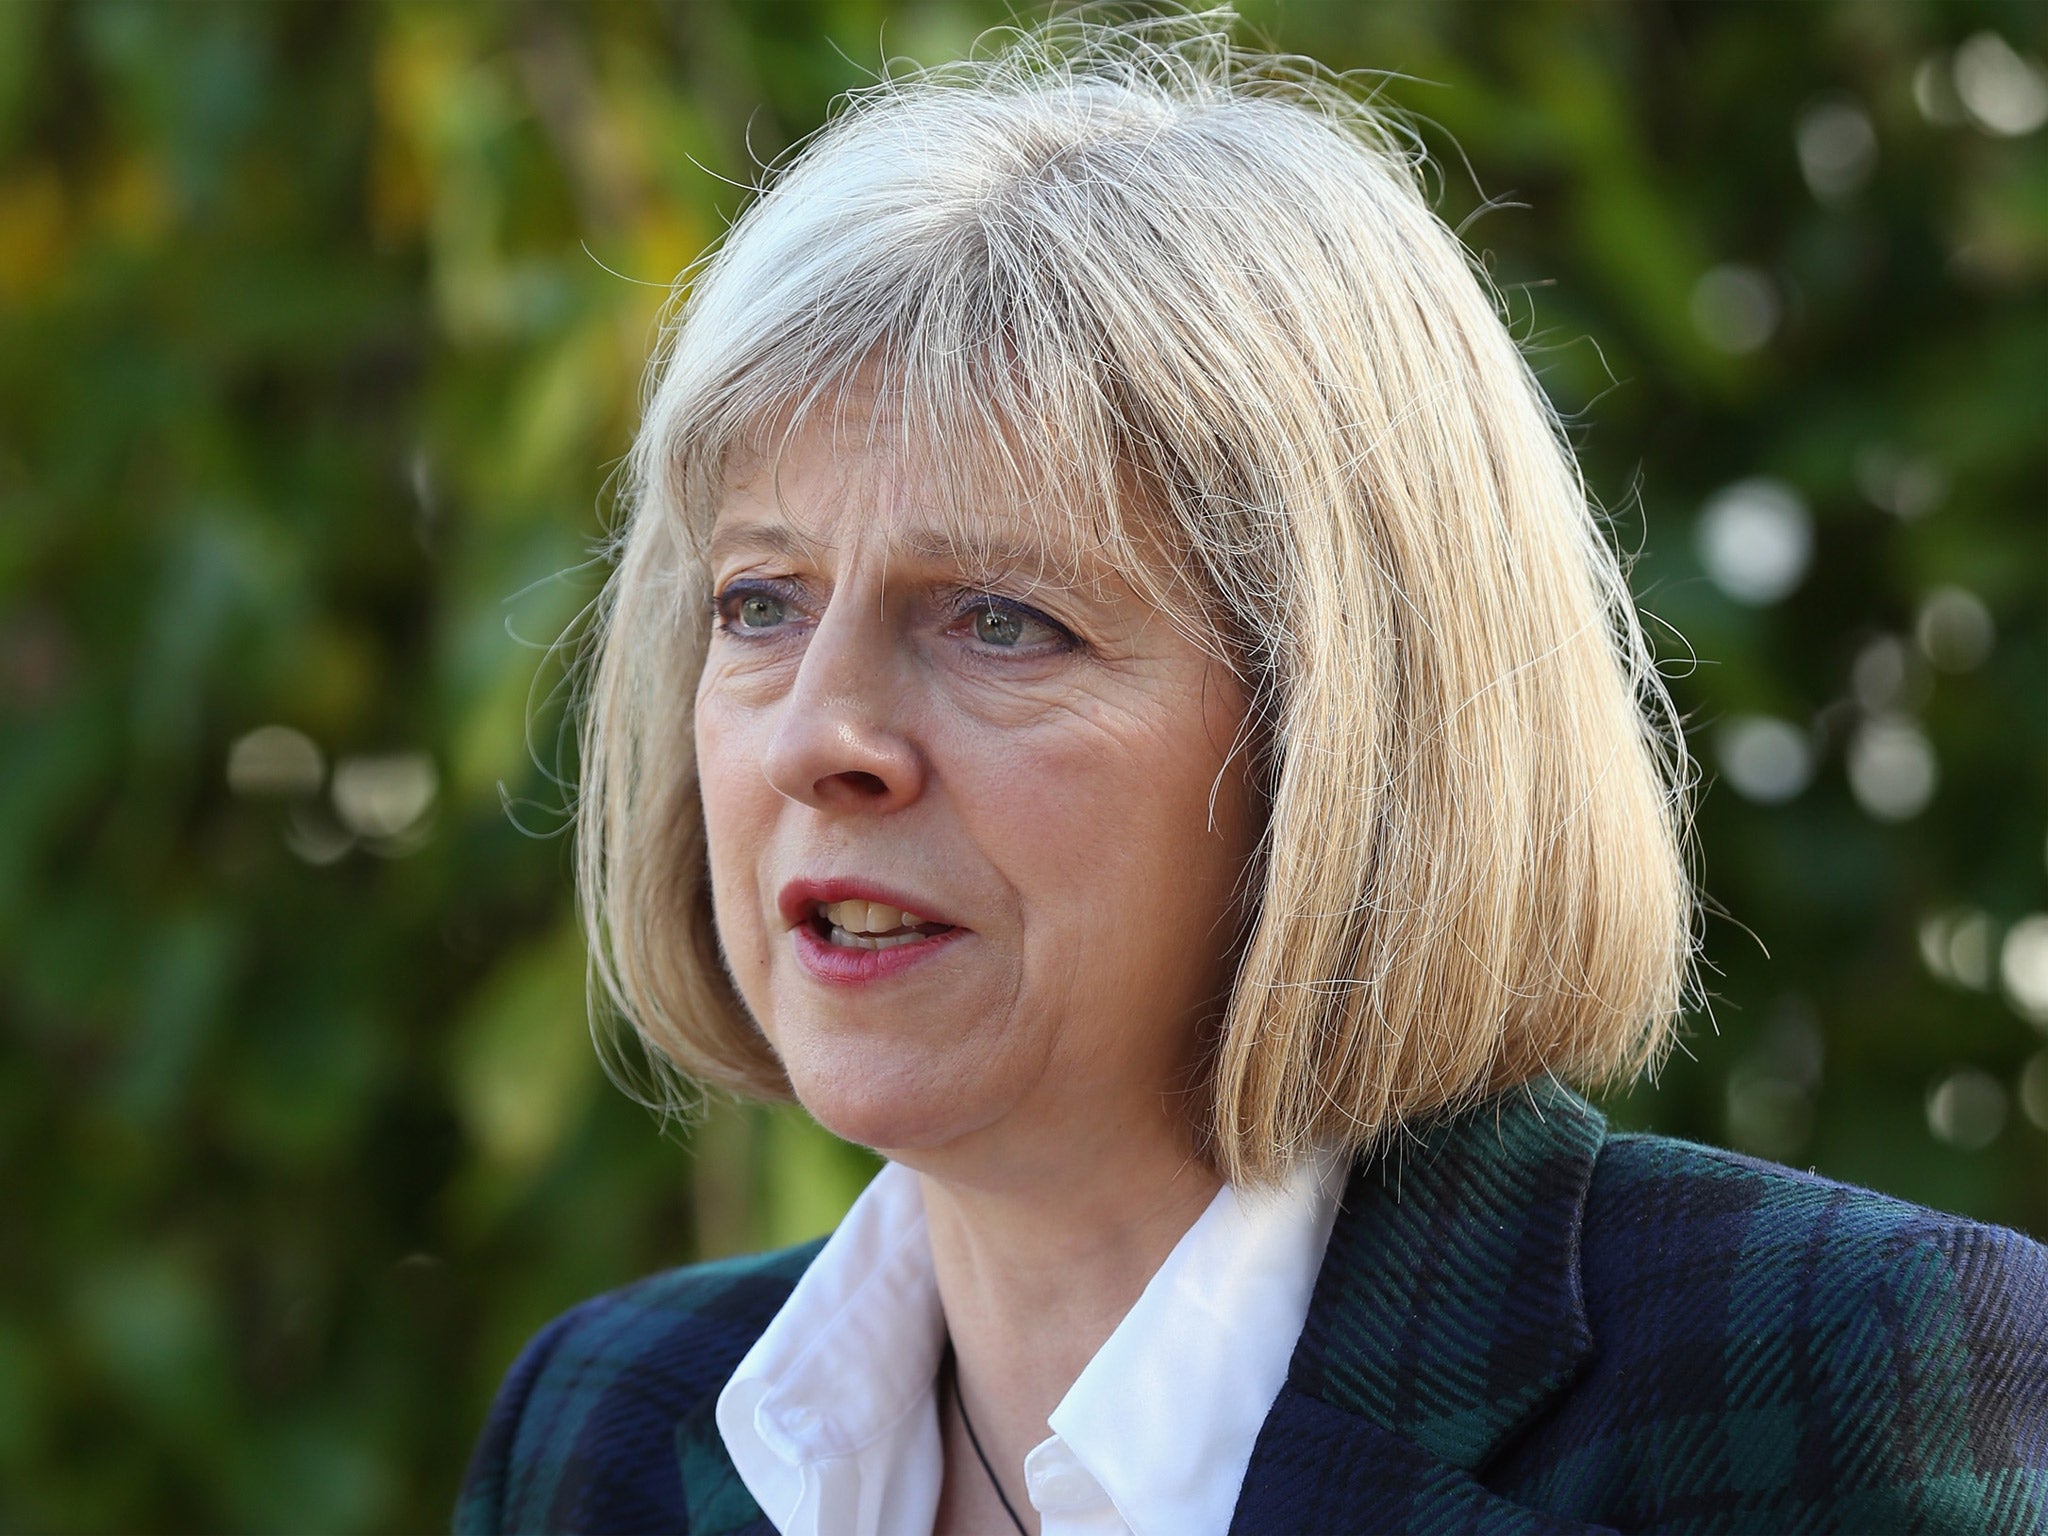 The Home Secretary will also tell MPs about a separate review of whether her department failed to act on claims of a paedophile ring in the 1980s.